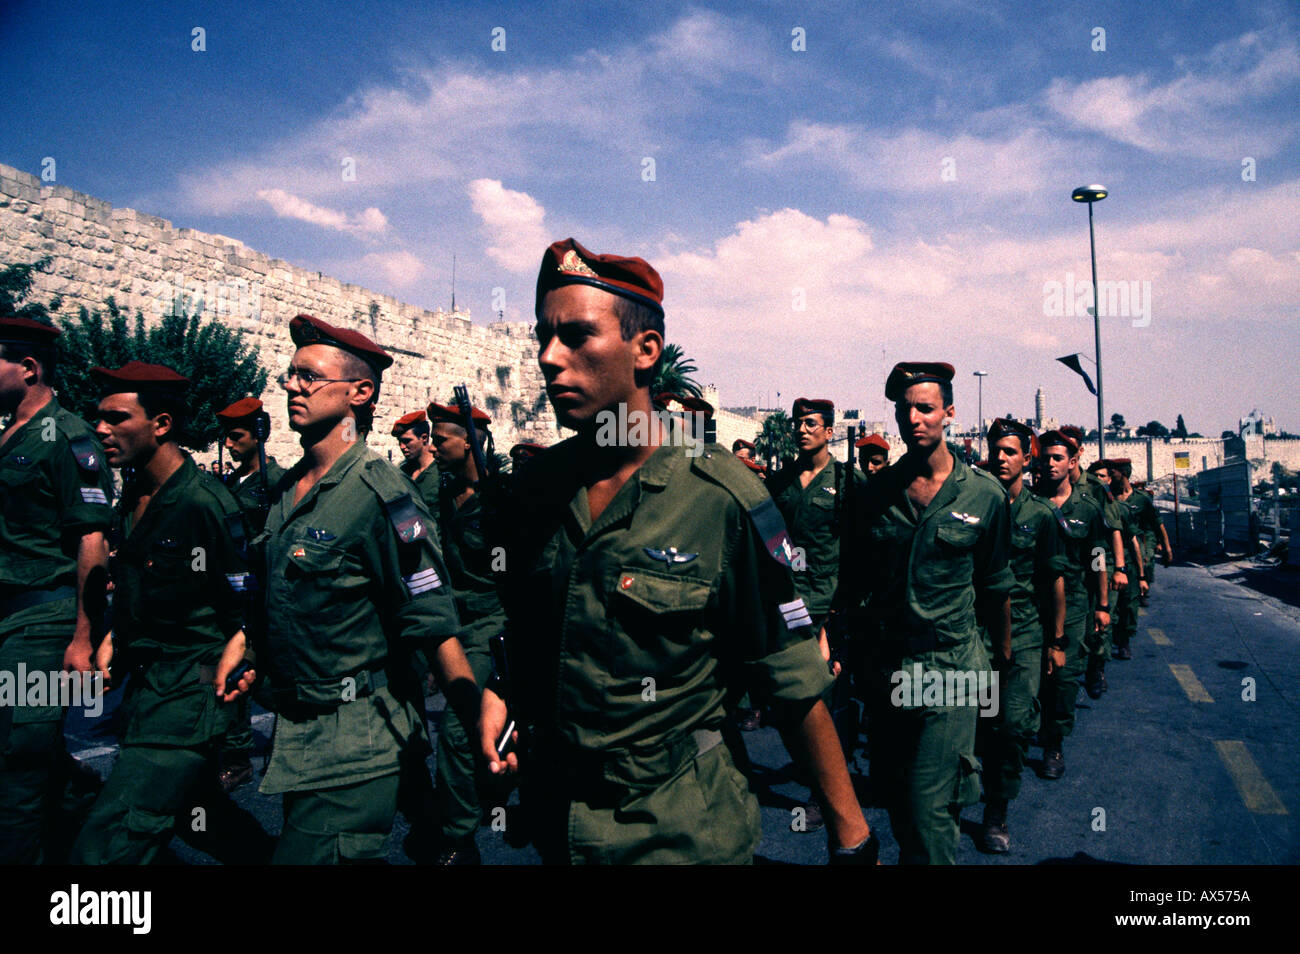 Israeli soldiers of the 35th Brigade also known as the Paratroopers Brigade parade in front of old city walls during Jerusalem day celebrations Stock Photo